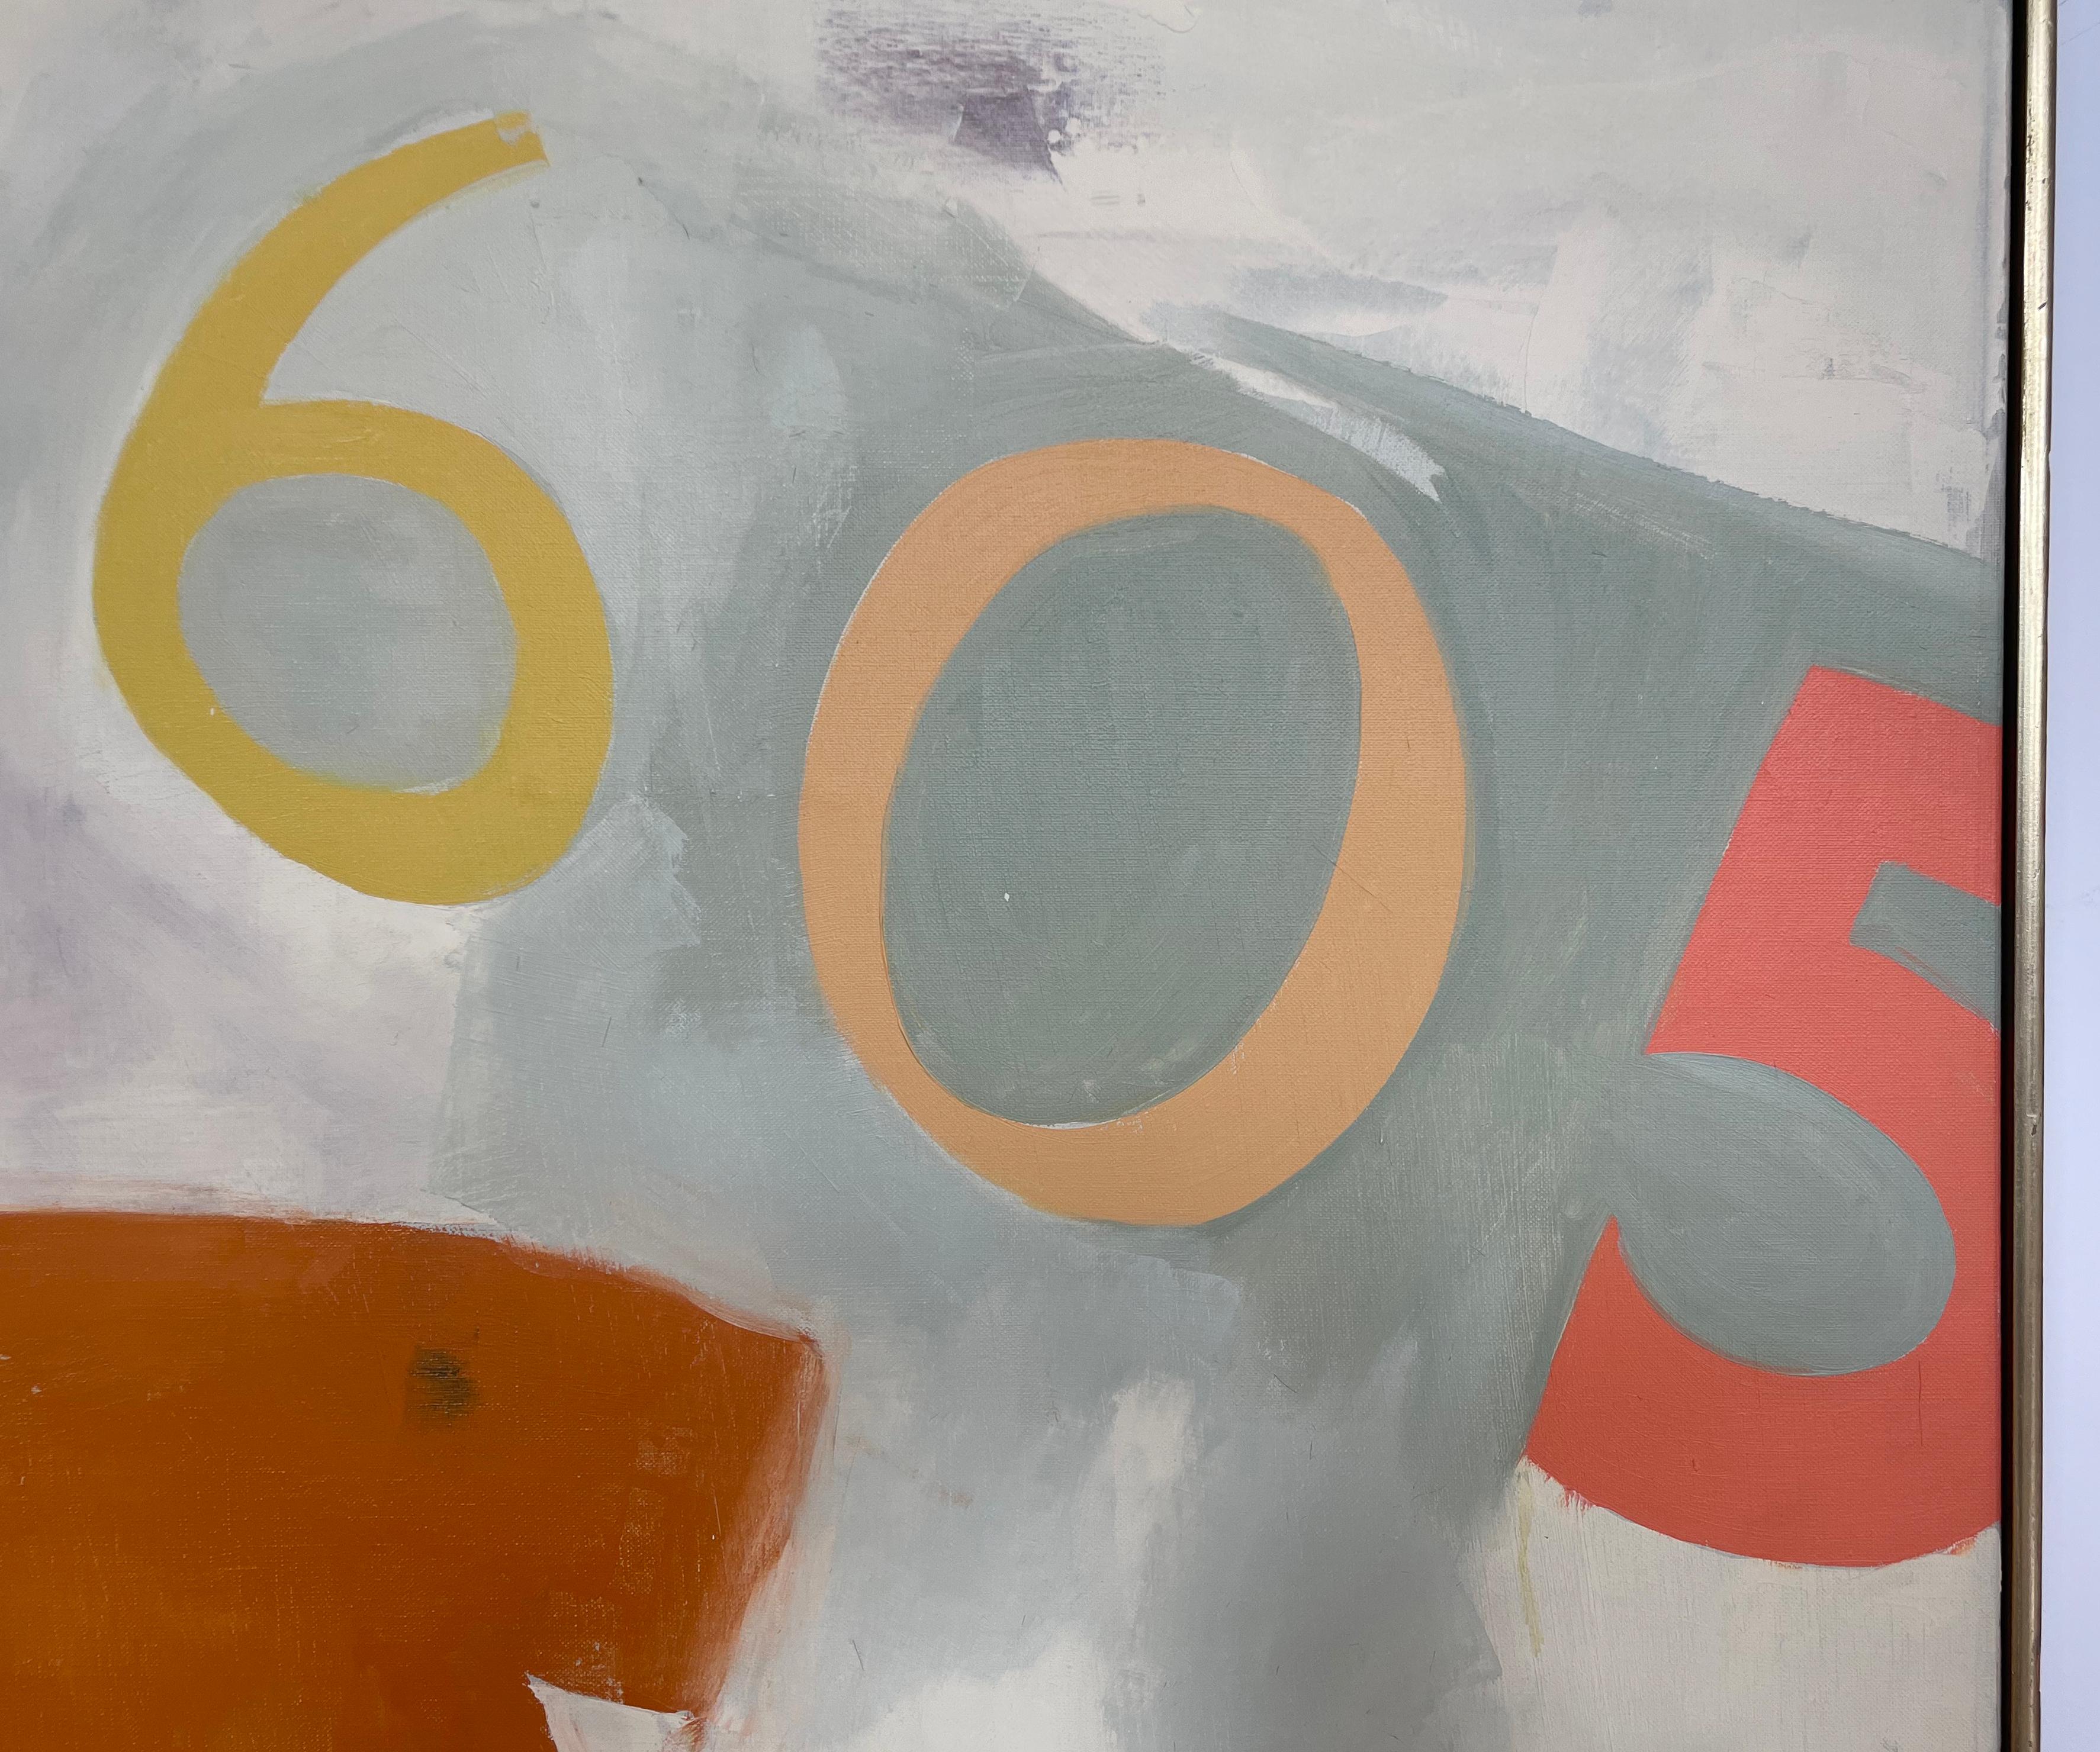 This impressive and unique beach related abstraction has a lovely soft peach color palette.  Inspired by his experience in Normandy France during the war, Della-Volpe has turned a real life experience and memory into a cool avant-garde abstraction. 